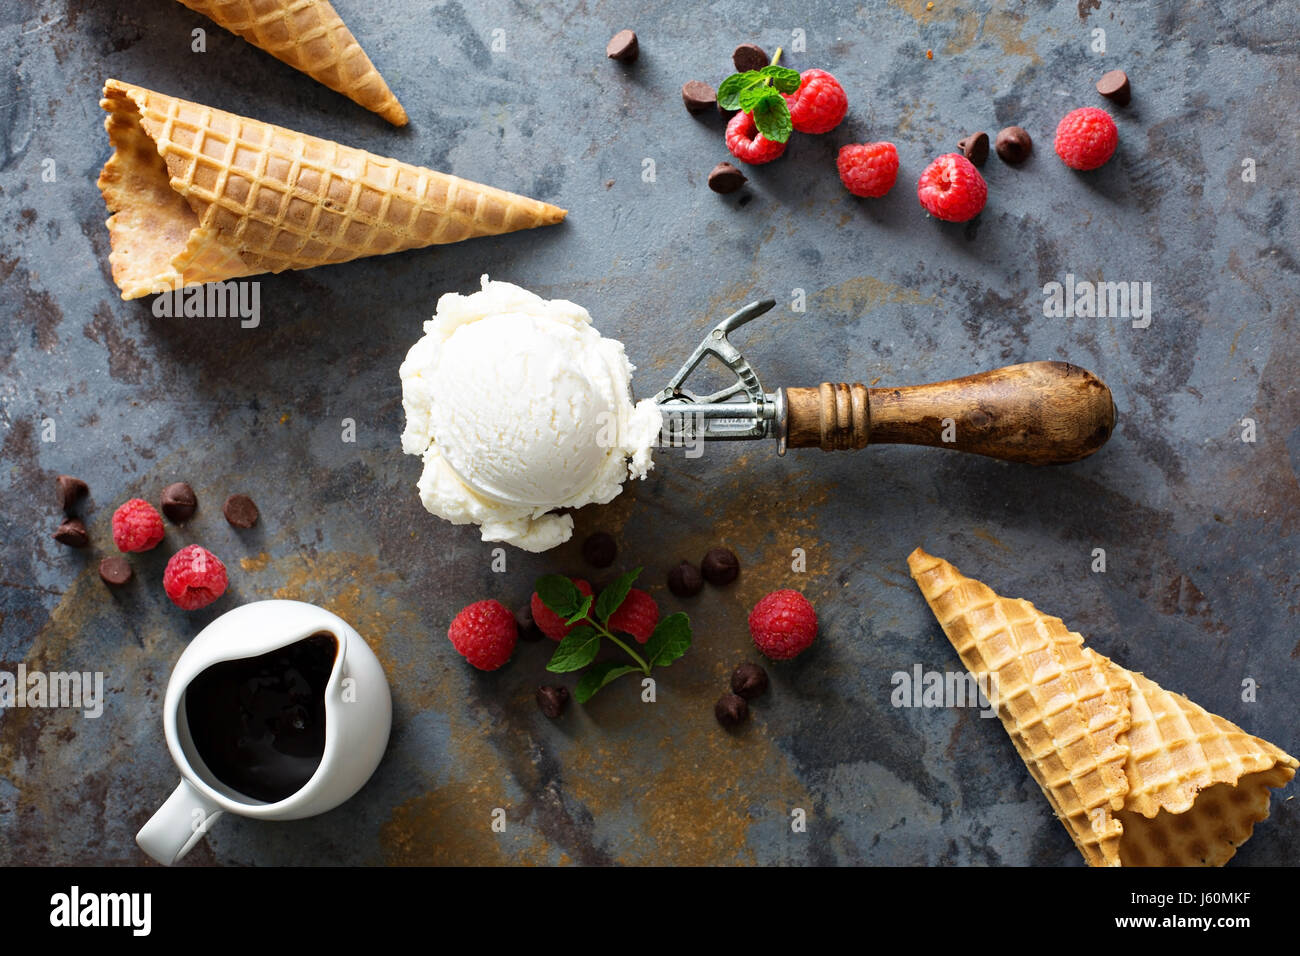 Close Up Still Life of Gourmet Double Scoop Ice Cream Sandwich with Variety  of Flavors Served on Donut with Red Berry Sauce Served on Wooden Paddle  Stock Photo - Alamy